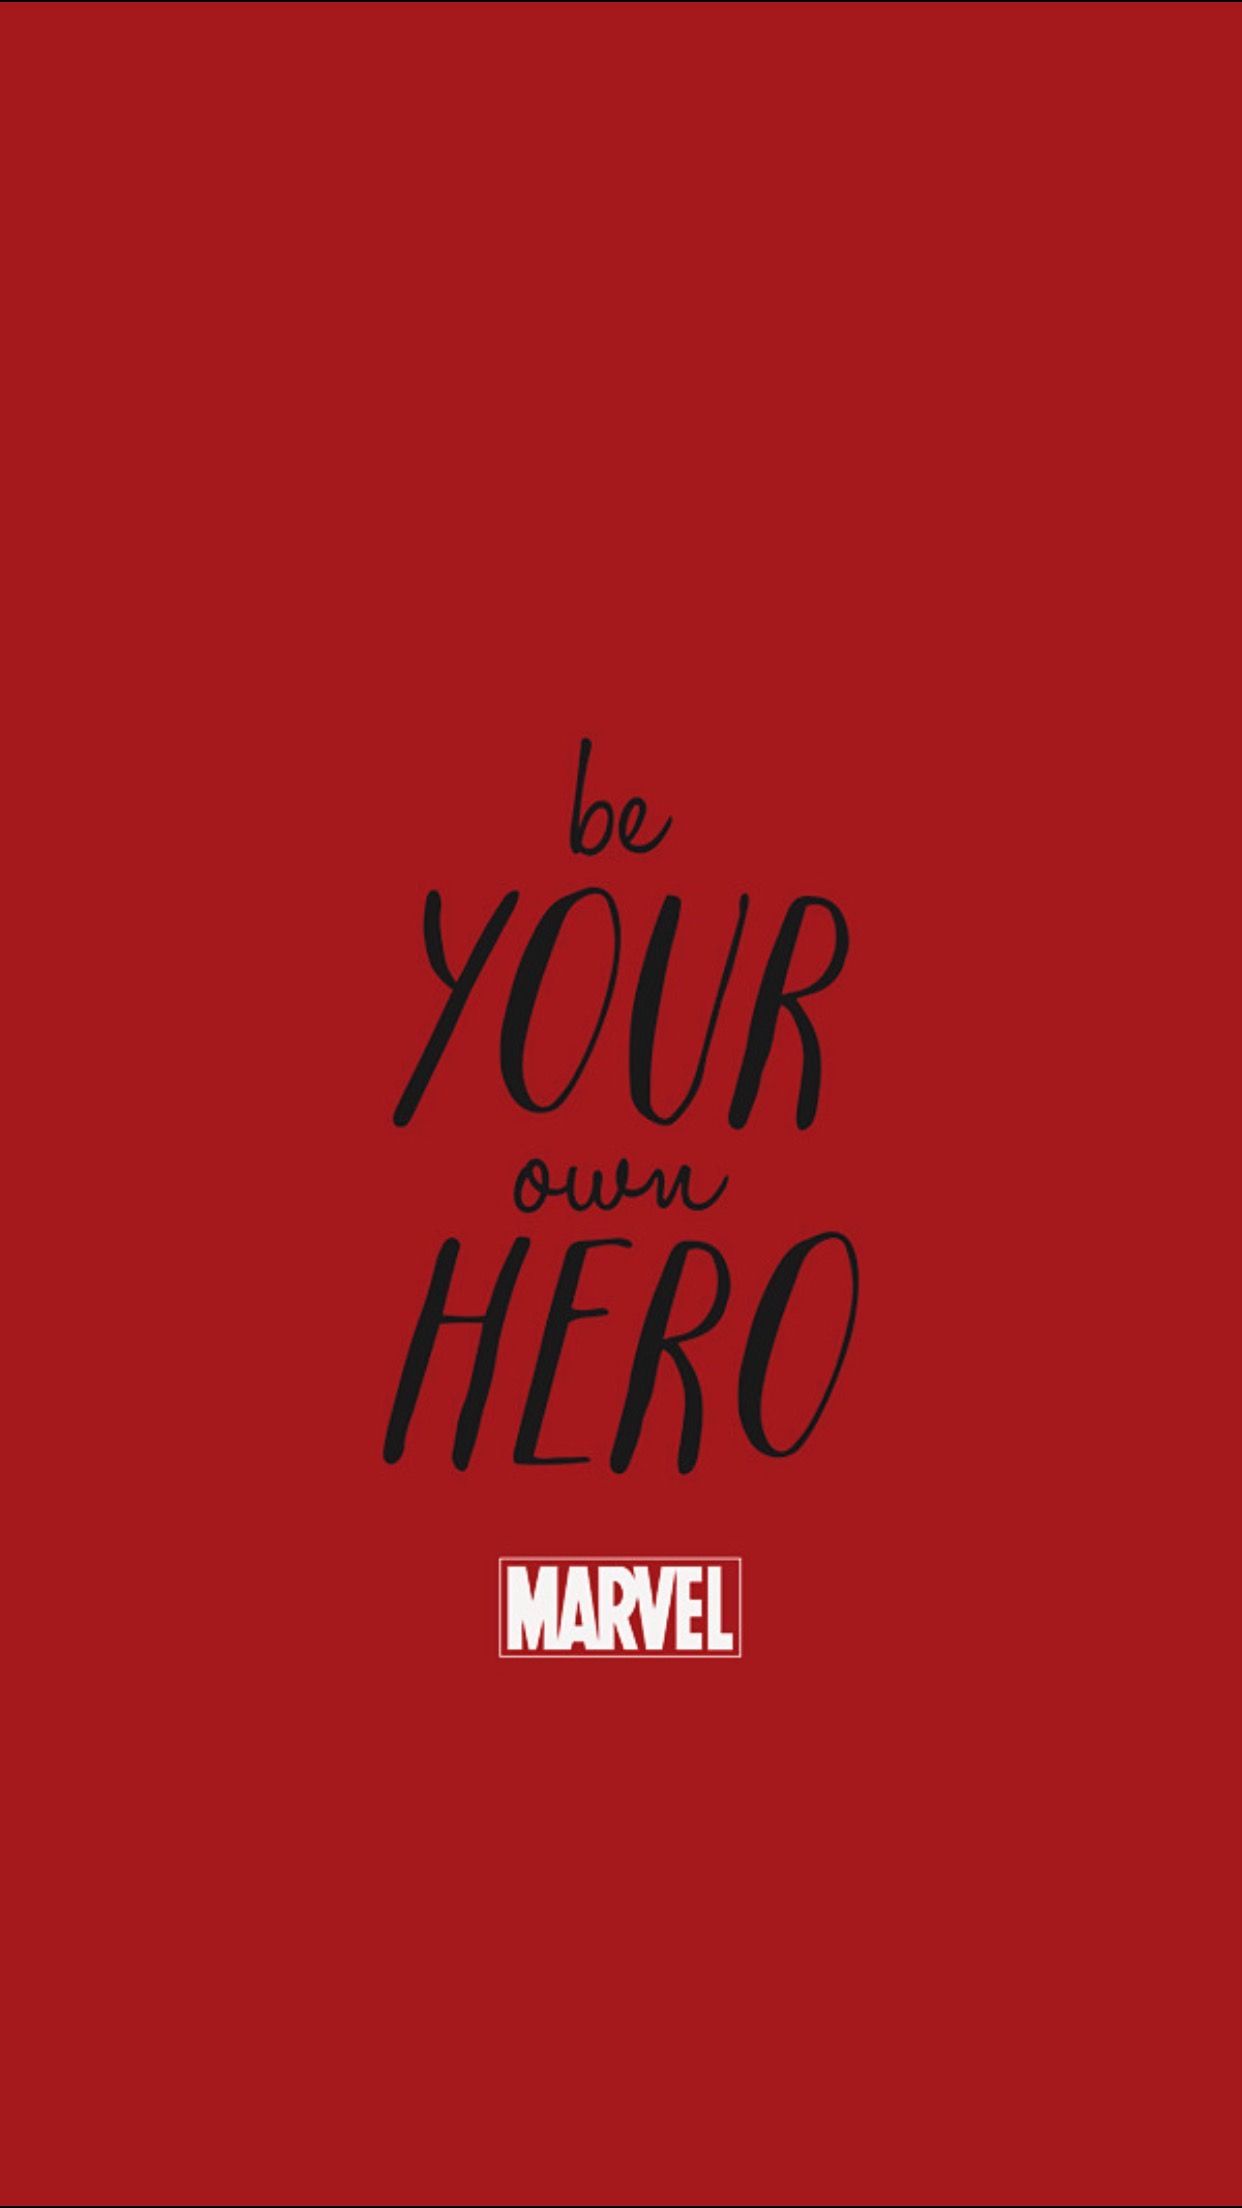 Be Your Own Hero. Marvel quotes .in.com